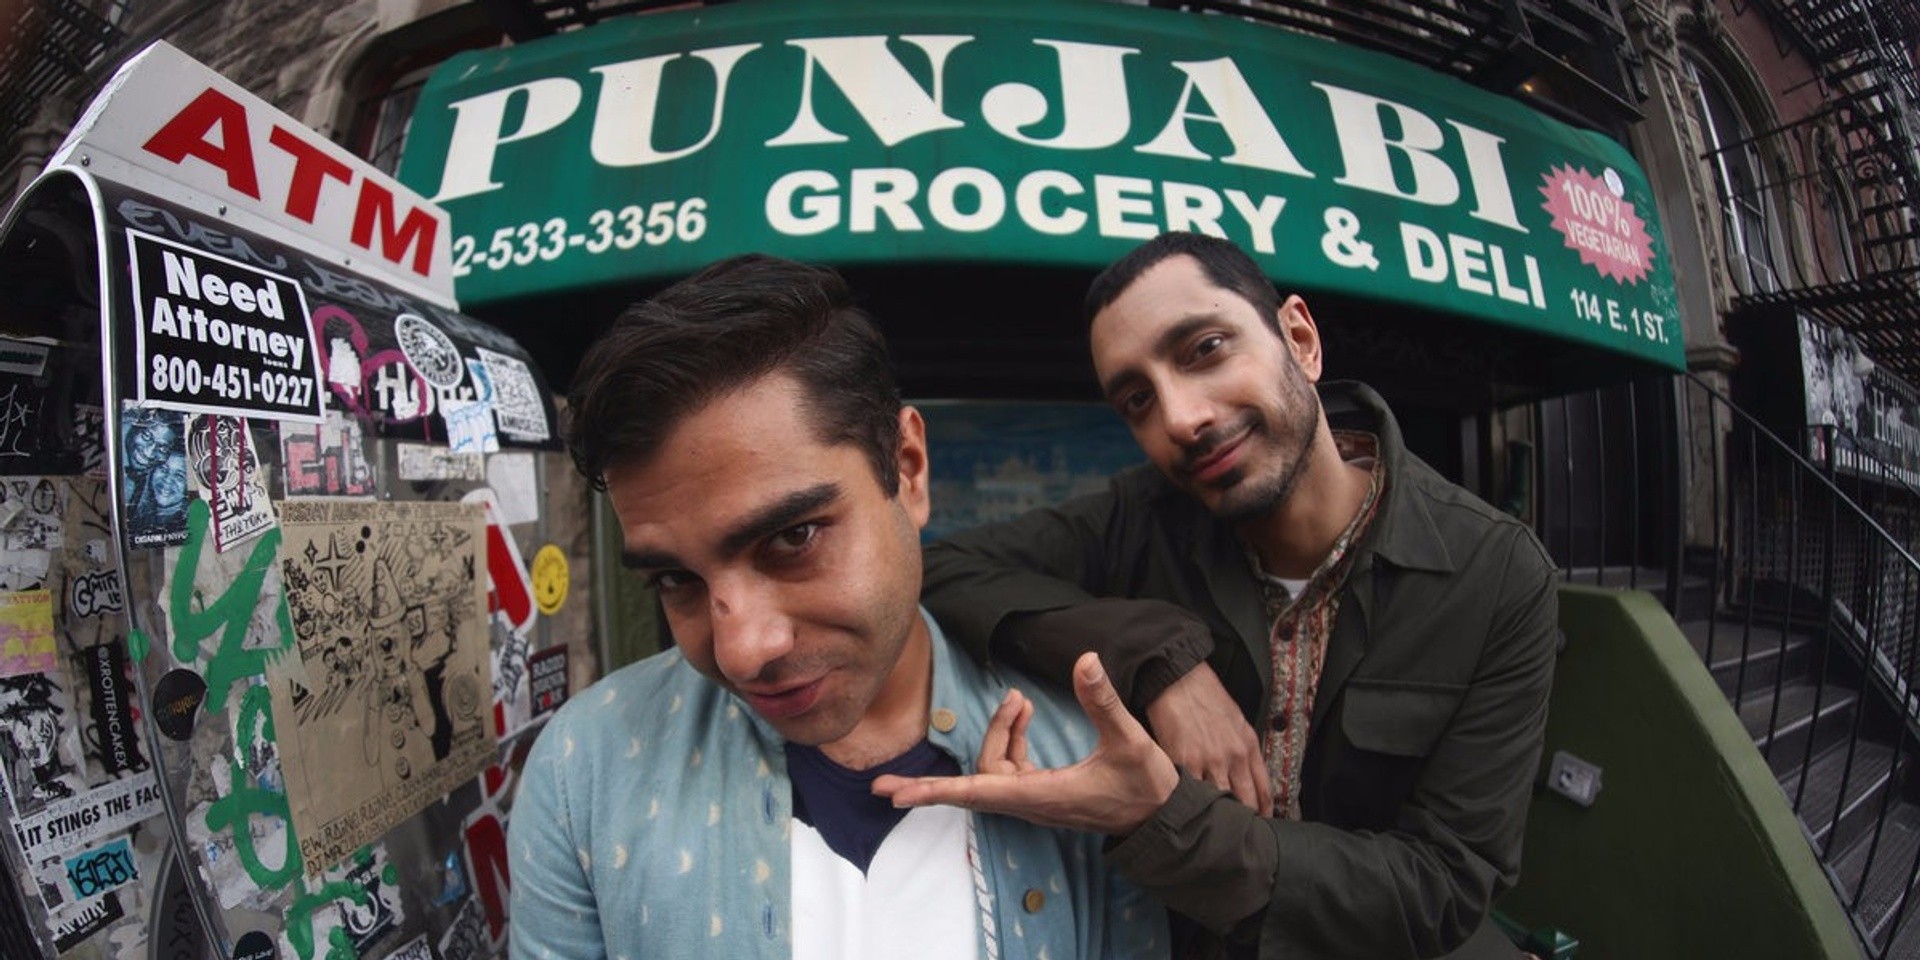 Songs by Asian and Muslim musicians to jam to in this post-Trump world